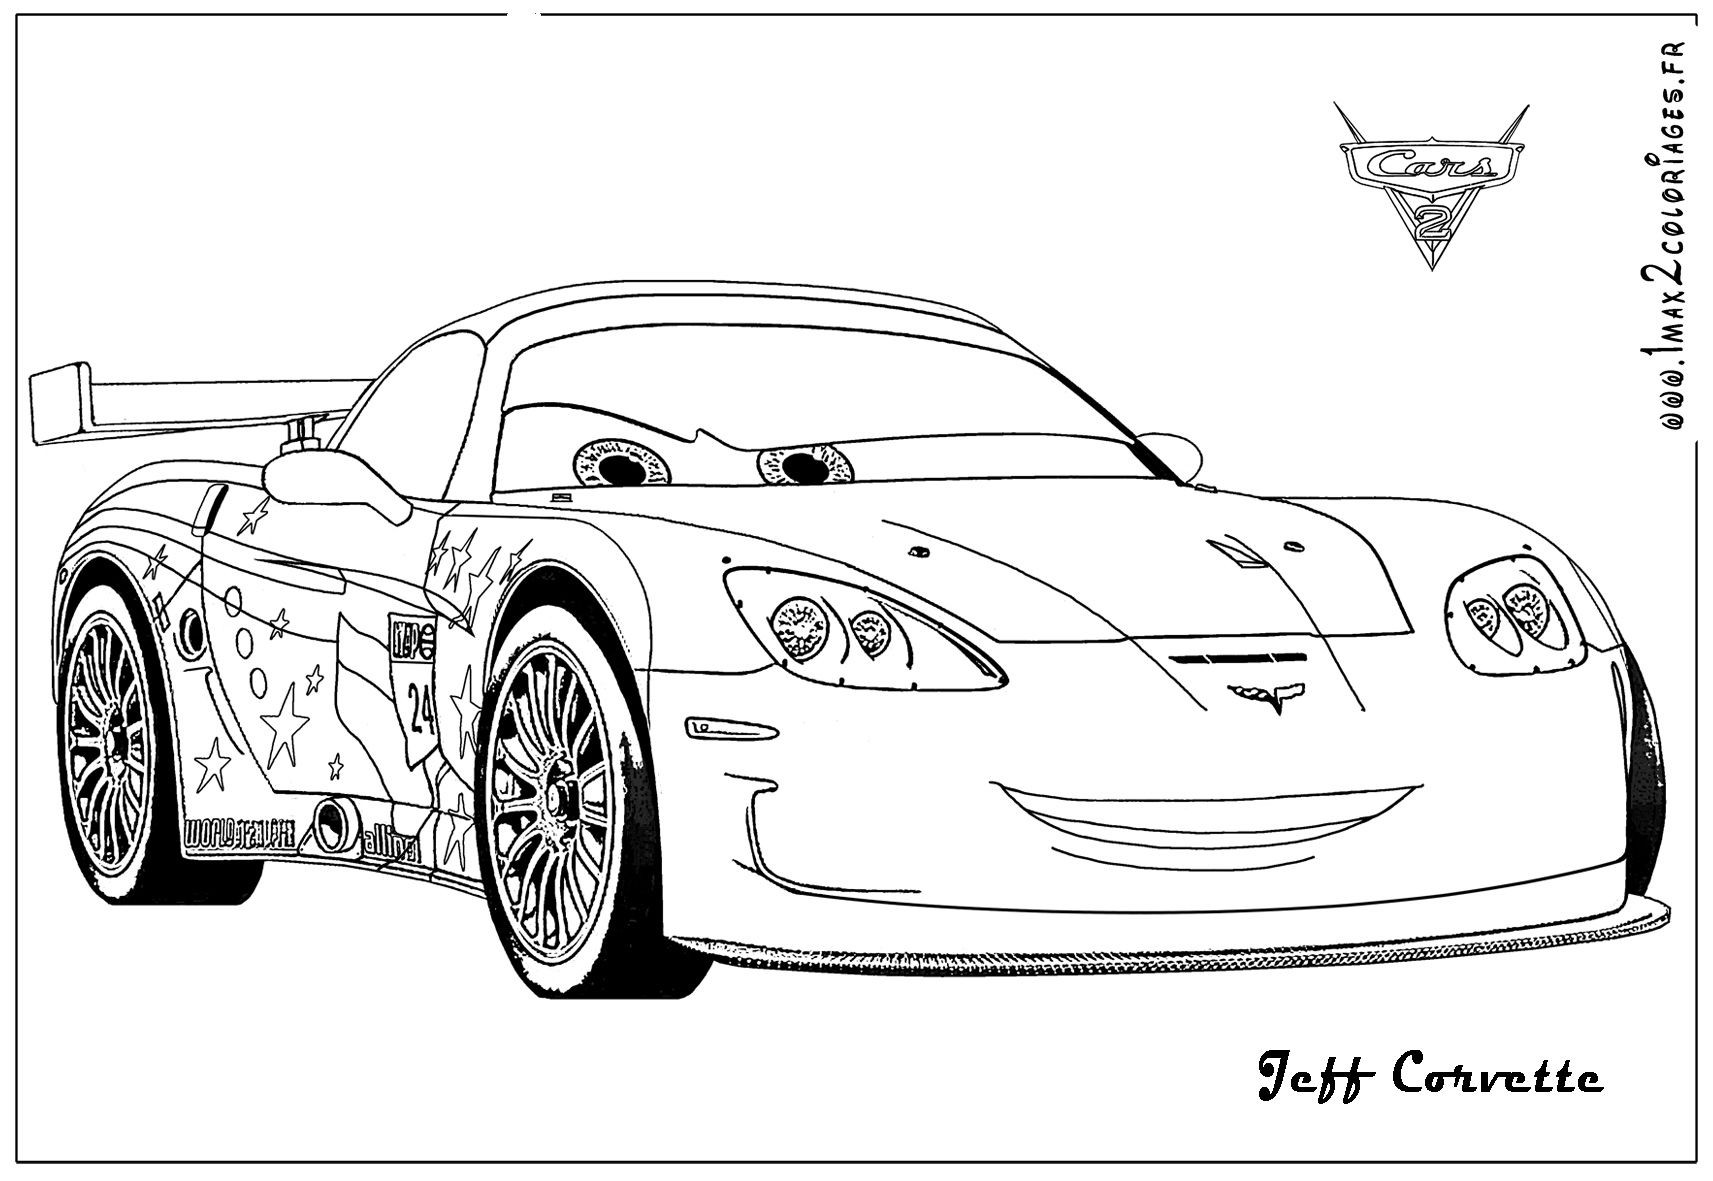 Cars 2 Free Coloring Pages
 Cars 2 Jeff Corvette Coloring Page